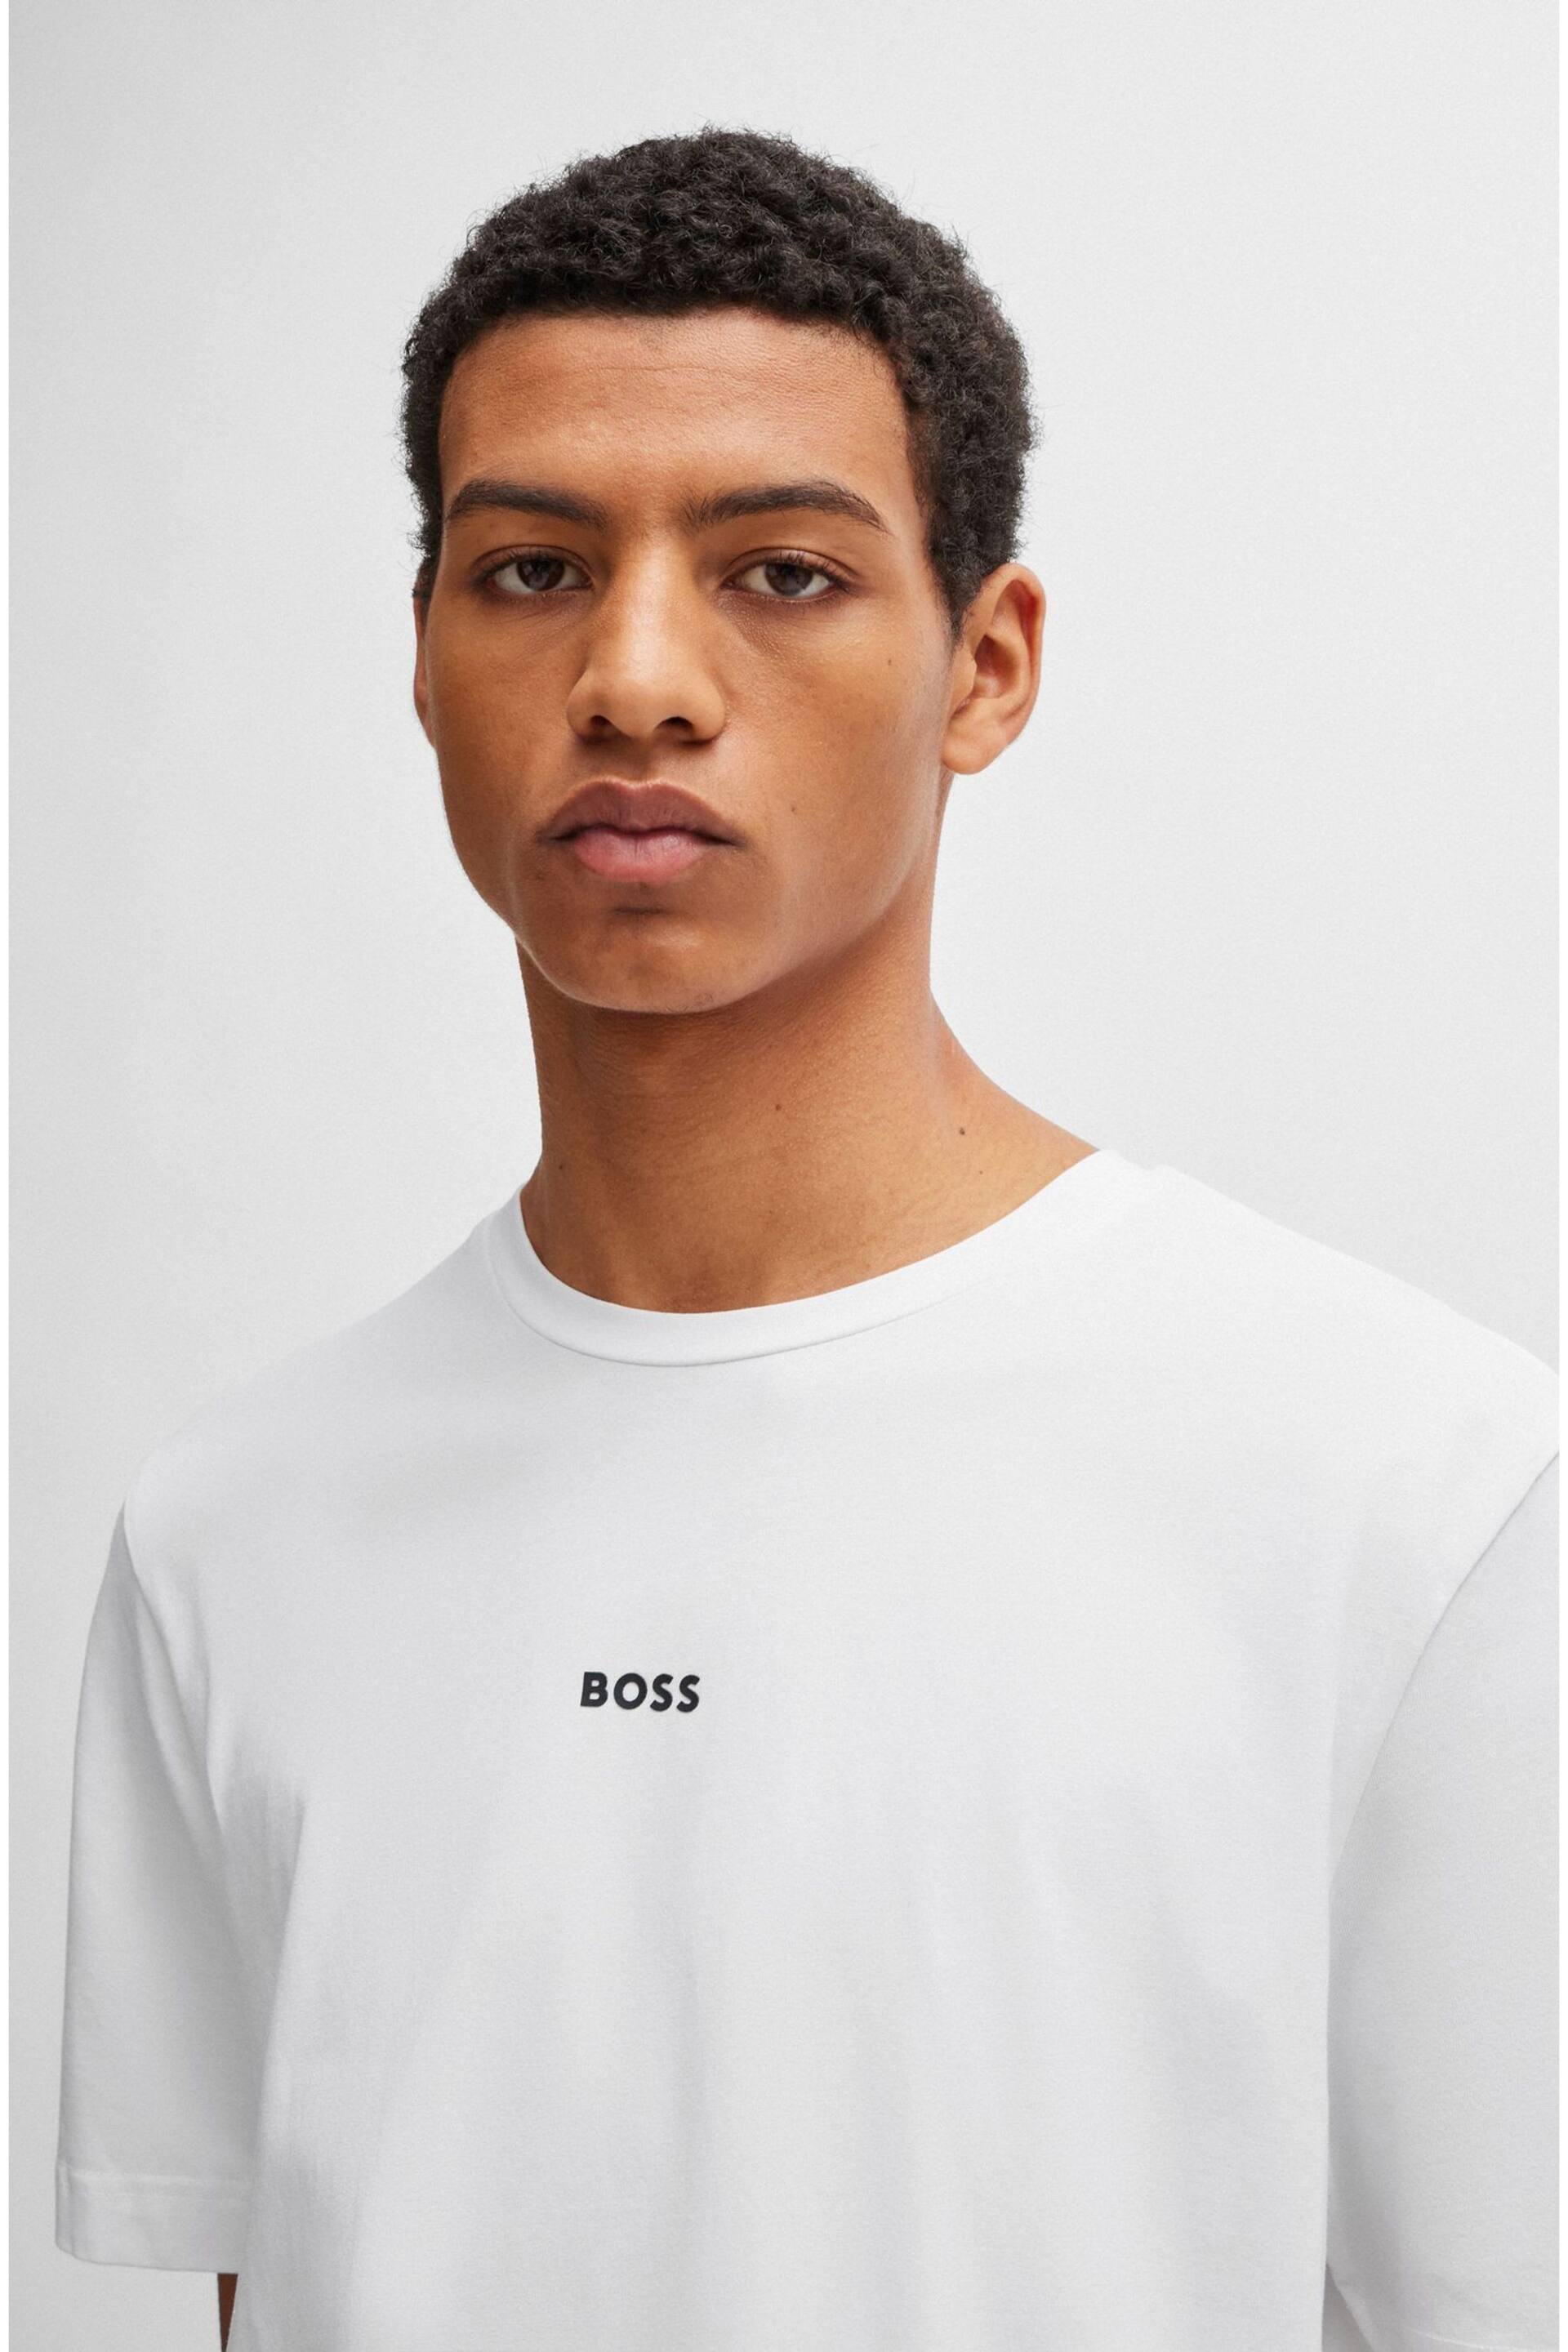 BOSS White Relaxed Fit Central Logo T-Shirt - Image 4 of 5